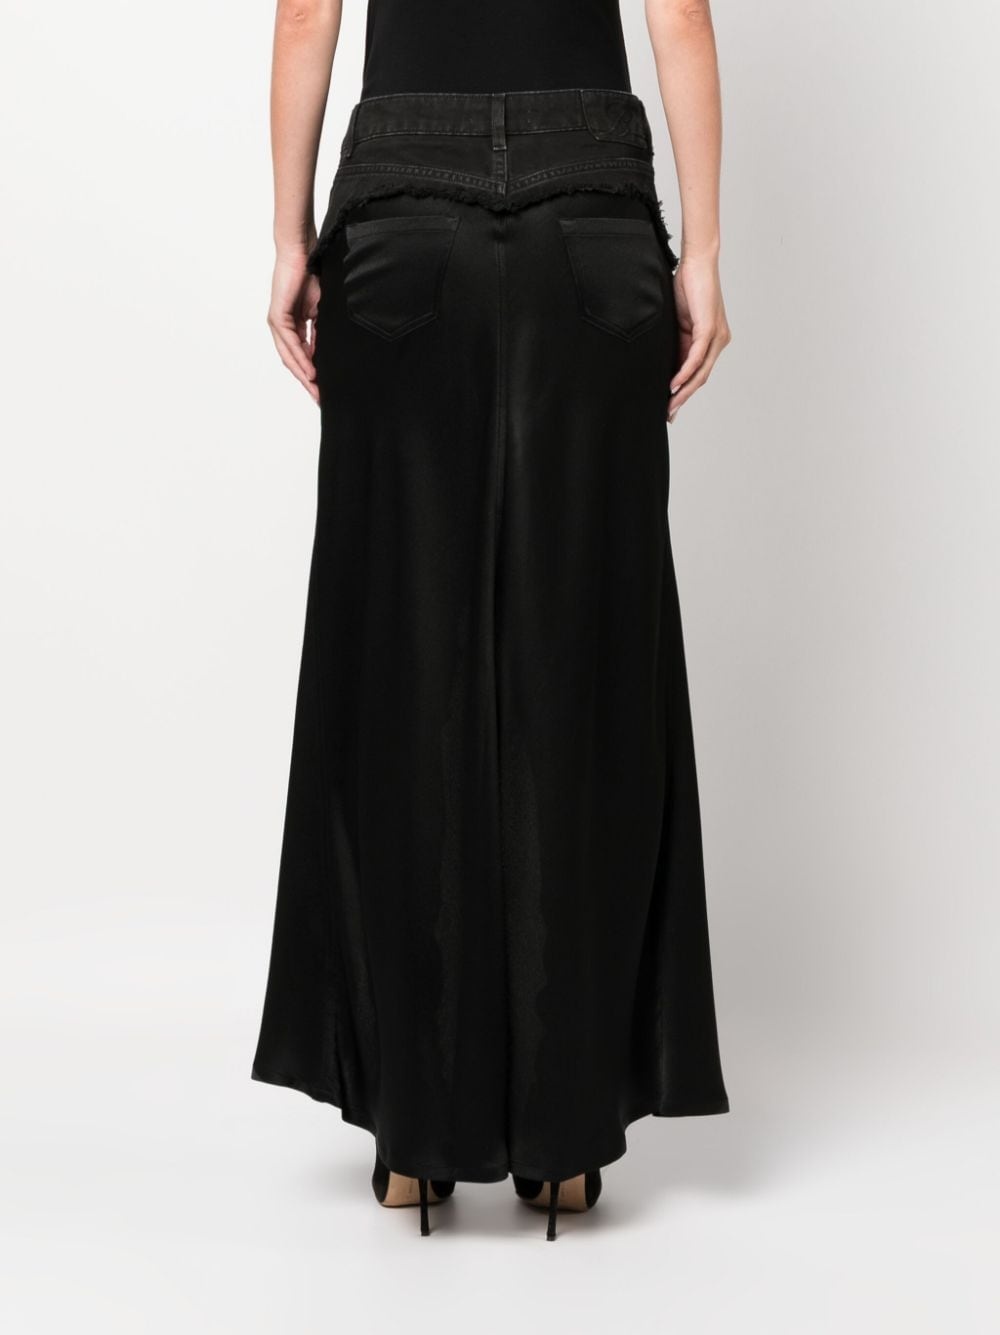 layered detail ankle-length skirt - 4